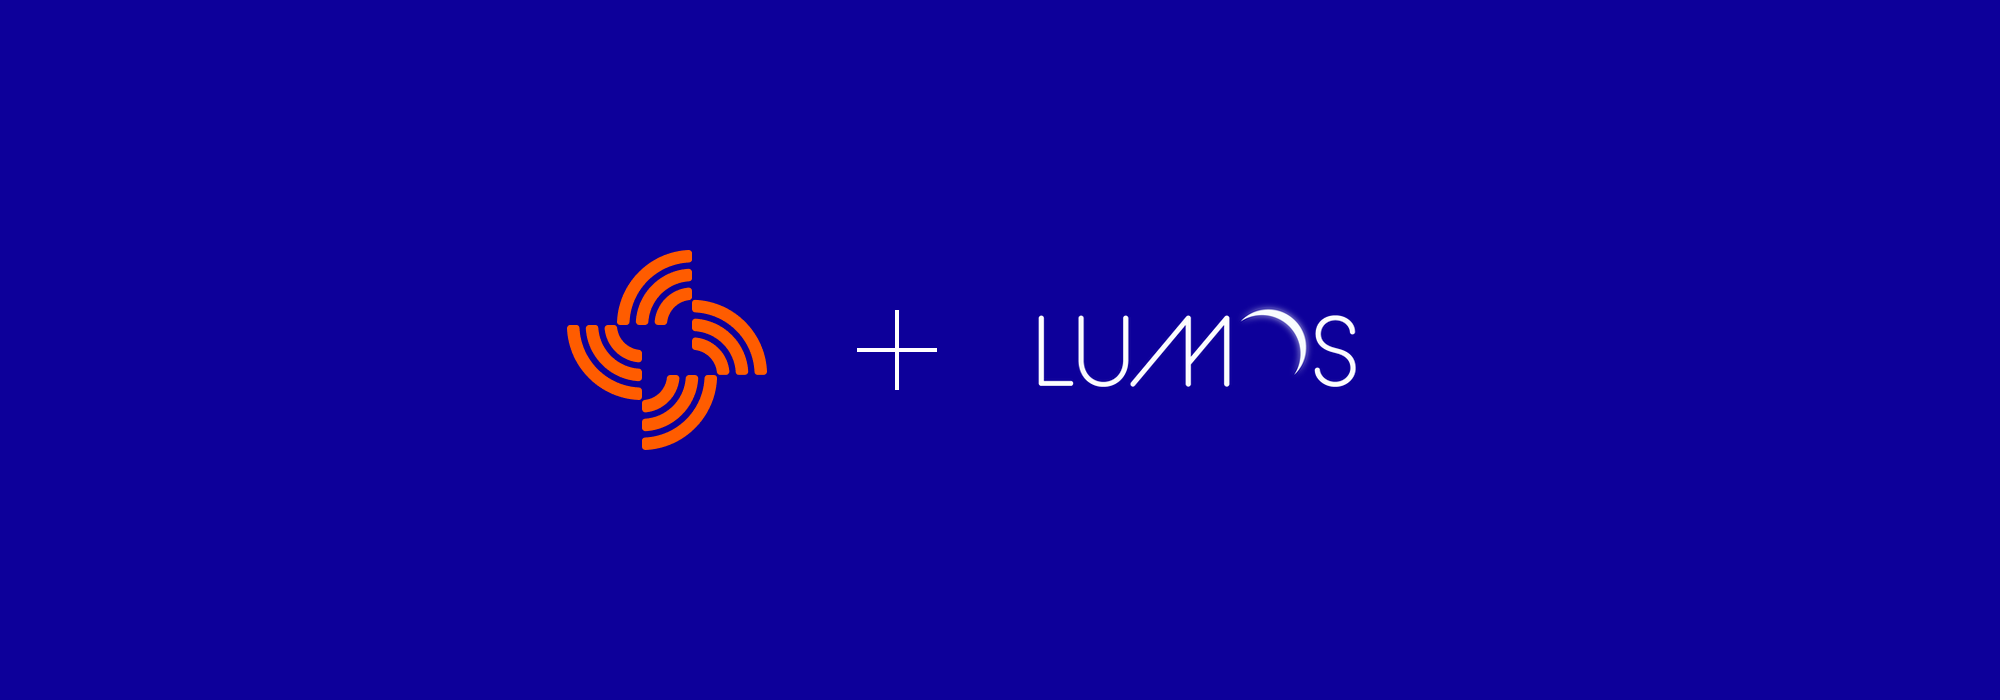 Streamr is partnering with Lumos Labs